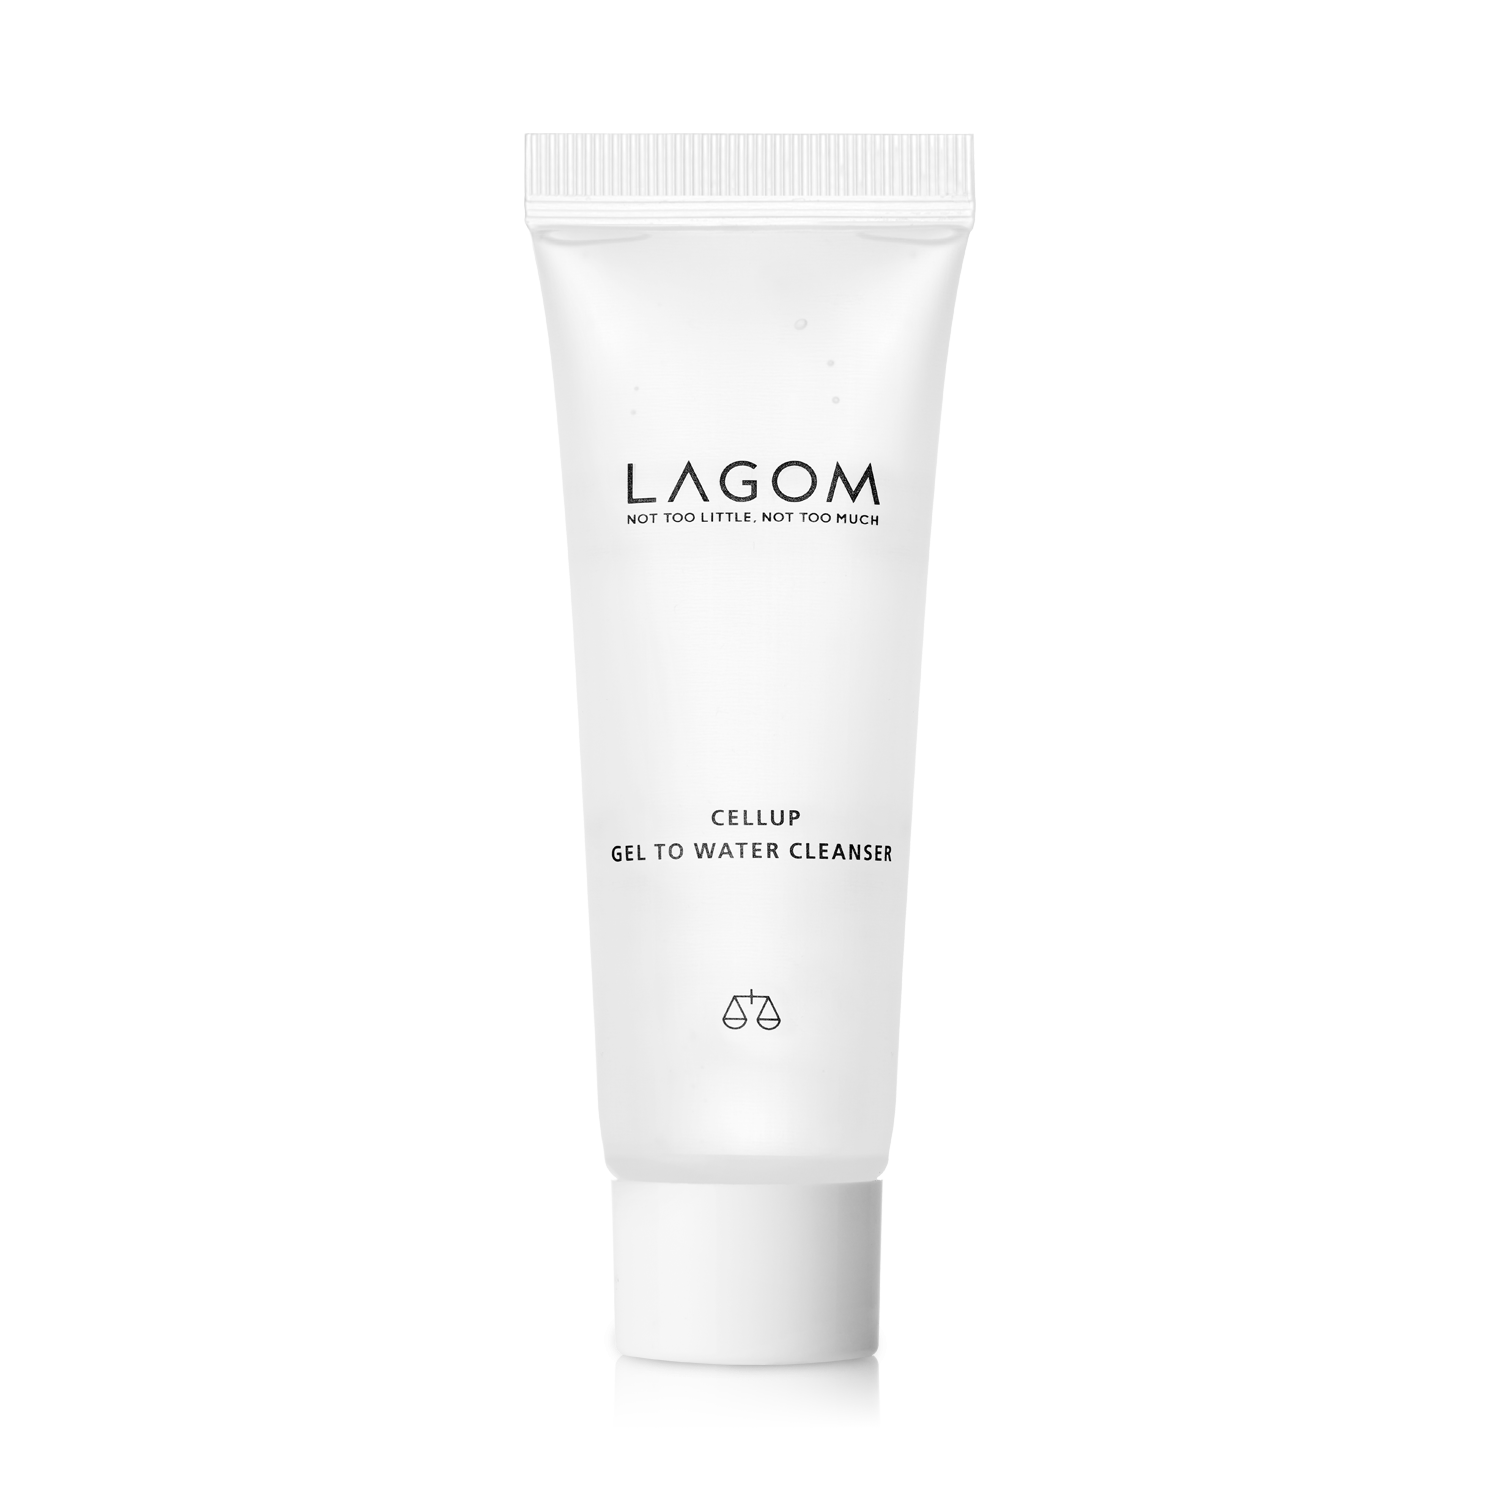 LAGOM Cellup gel to water cleanser